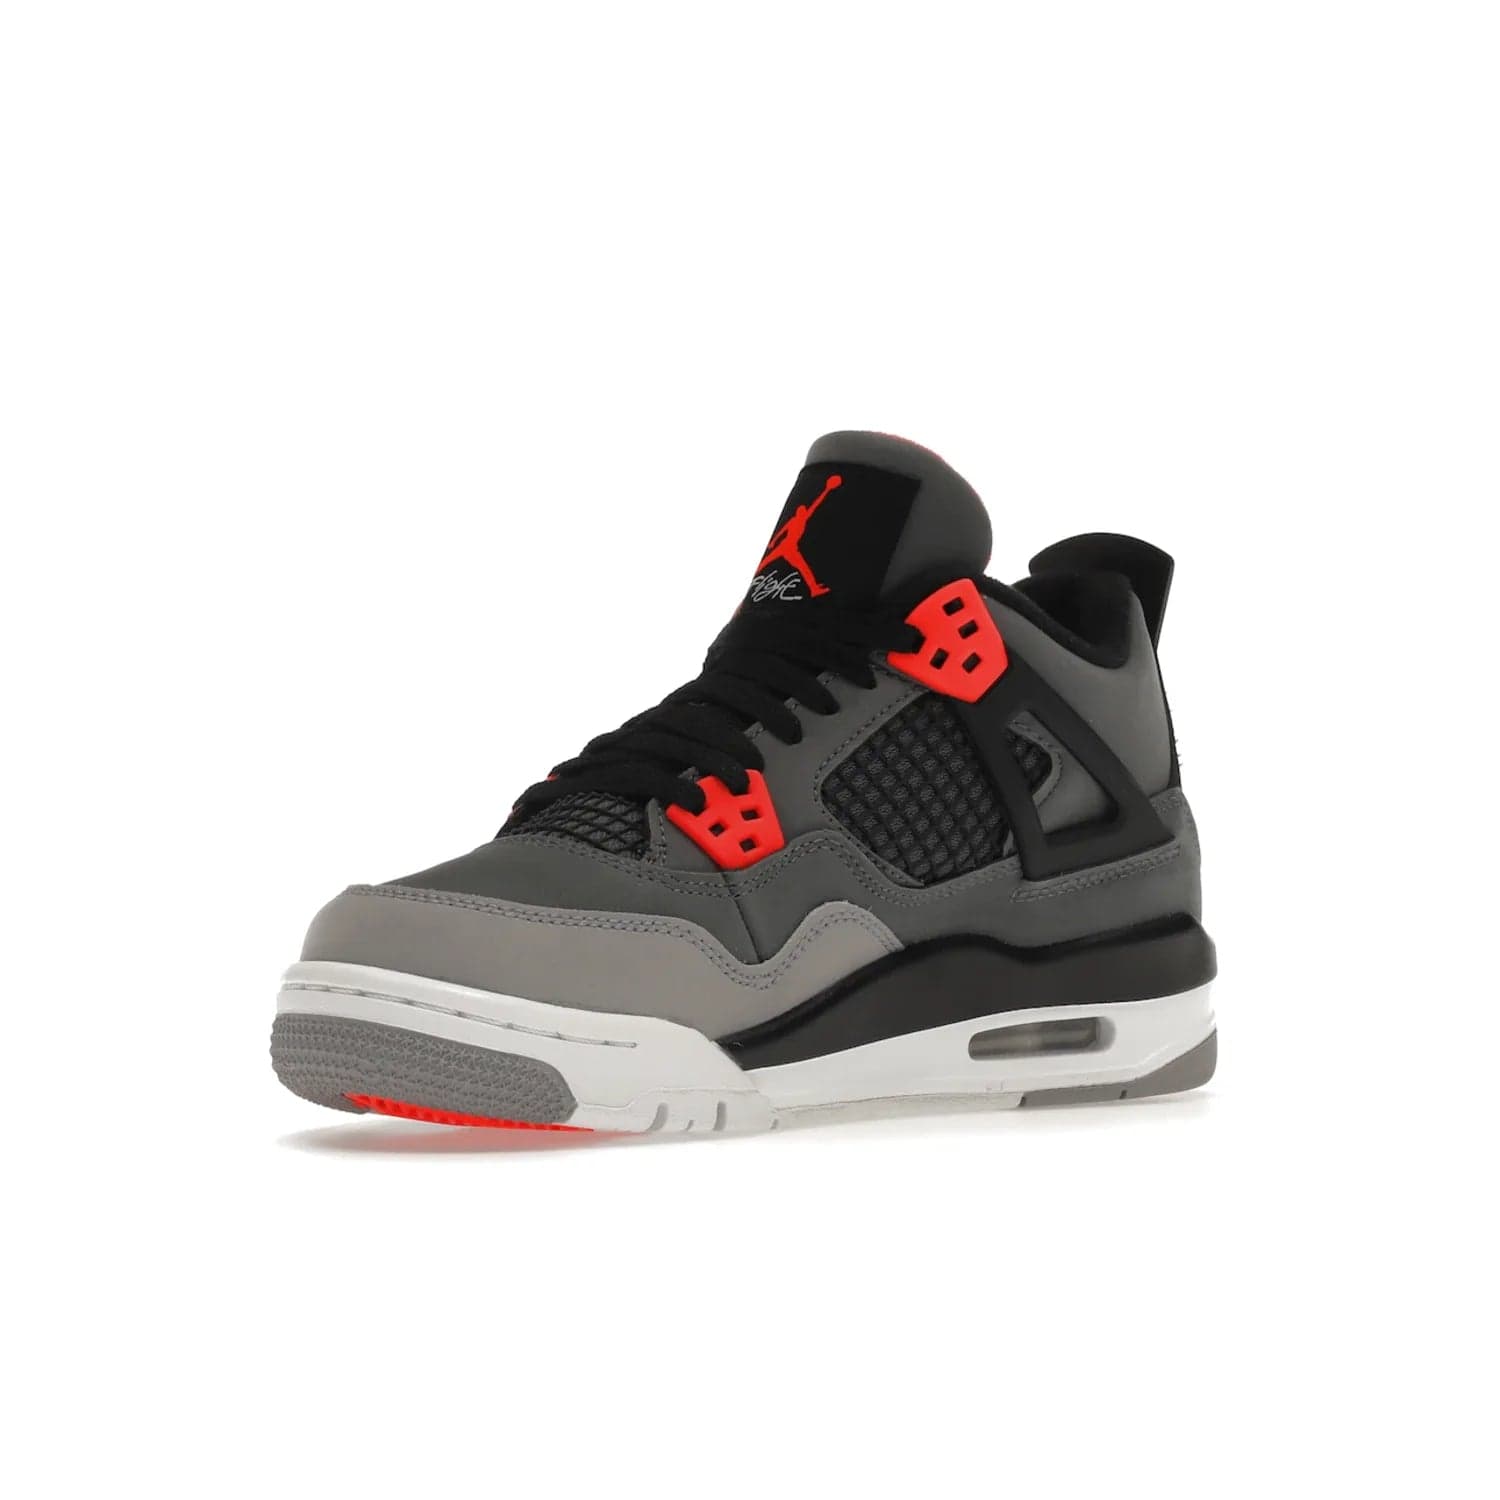 Jordan 4 Retro Infrared (GS) - Image 15 - Only at www.BallersClubKickz.com - Shop the Air Jordan 4 Retro Infrared (GS) for a classic silhouette with subtle yet bold features. Dark grey nubuck upper with lighter forefoot overlay, black accents, Infrared molded eyelets & woven tongue tag. Available June 2022.